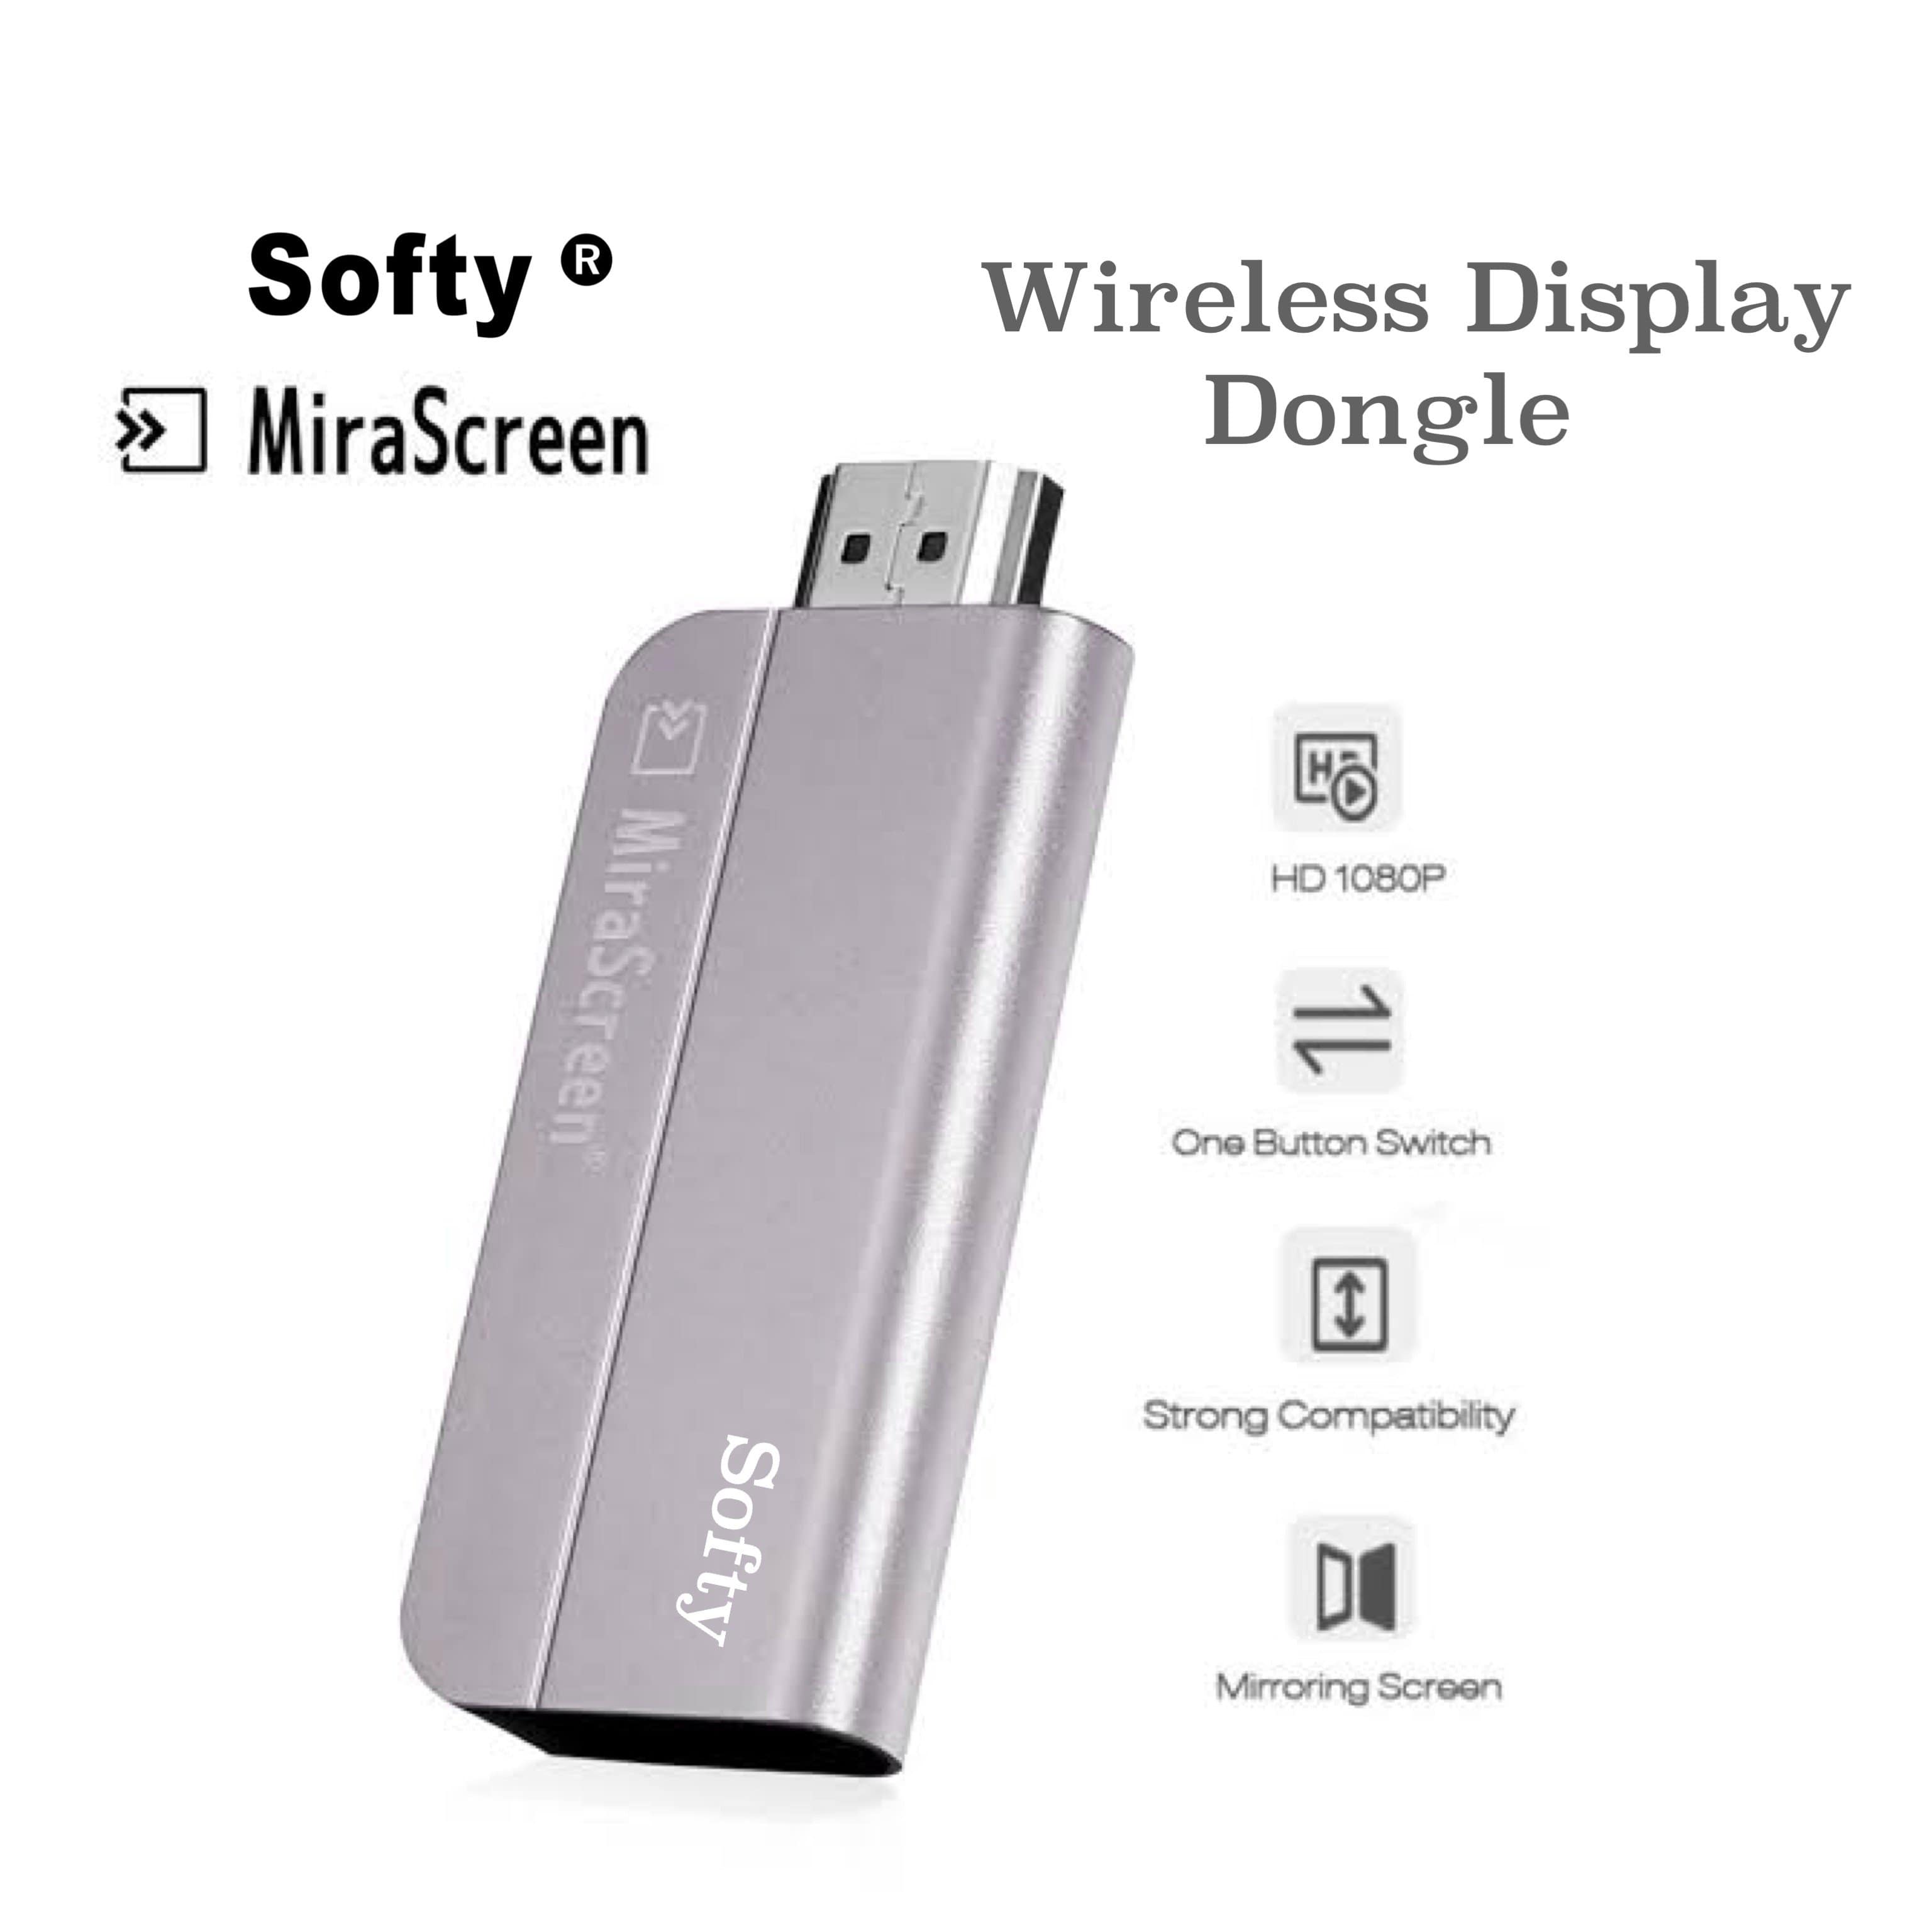 Softy premium quality wireless display Dongle (mira screen )-Connectors-dealsplant